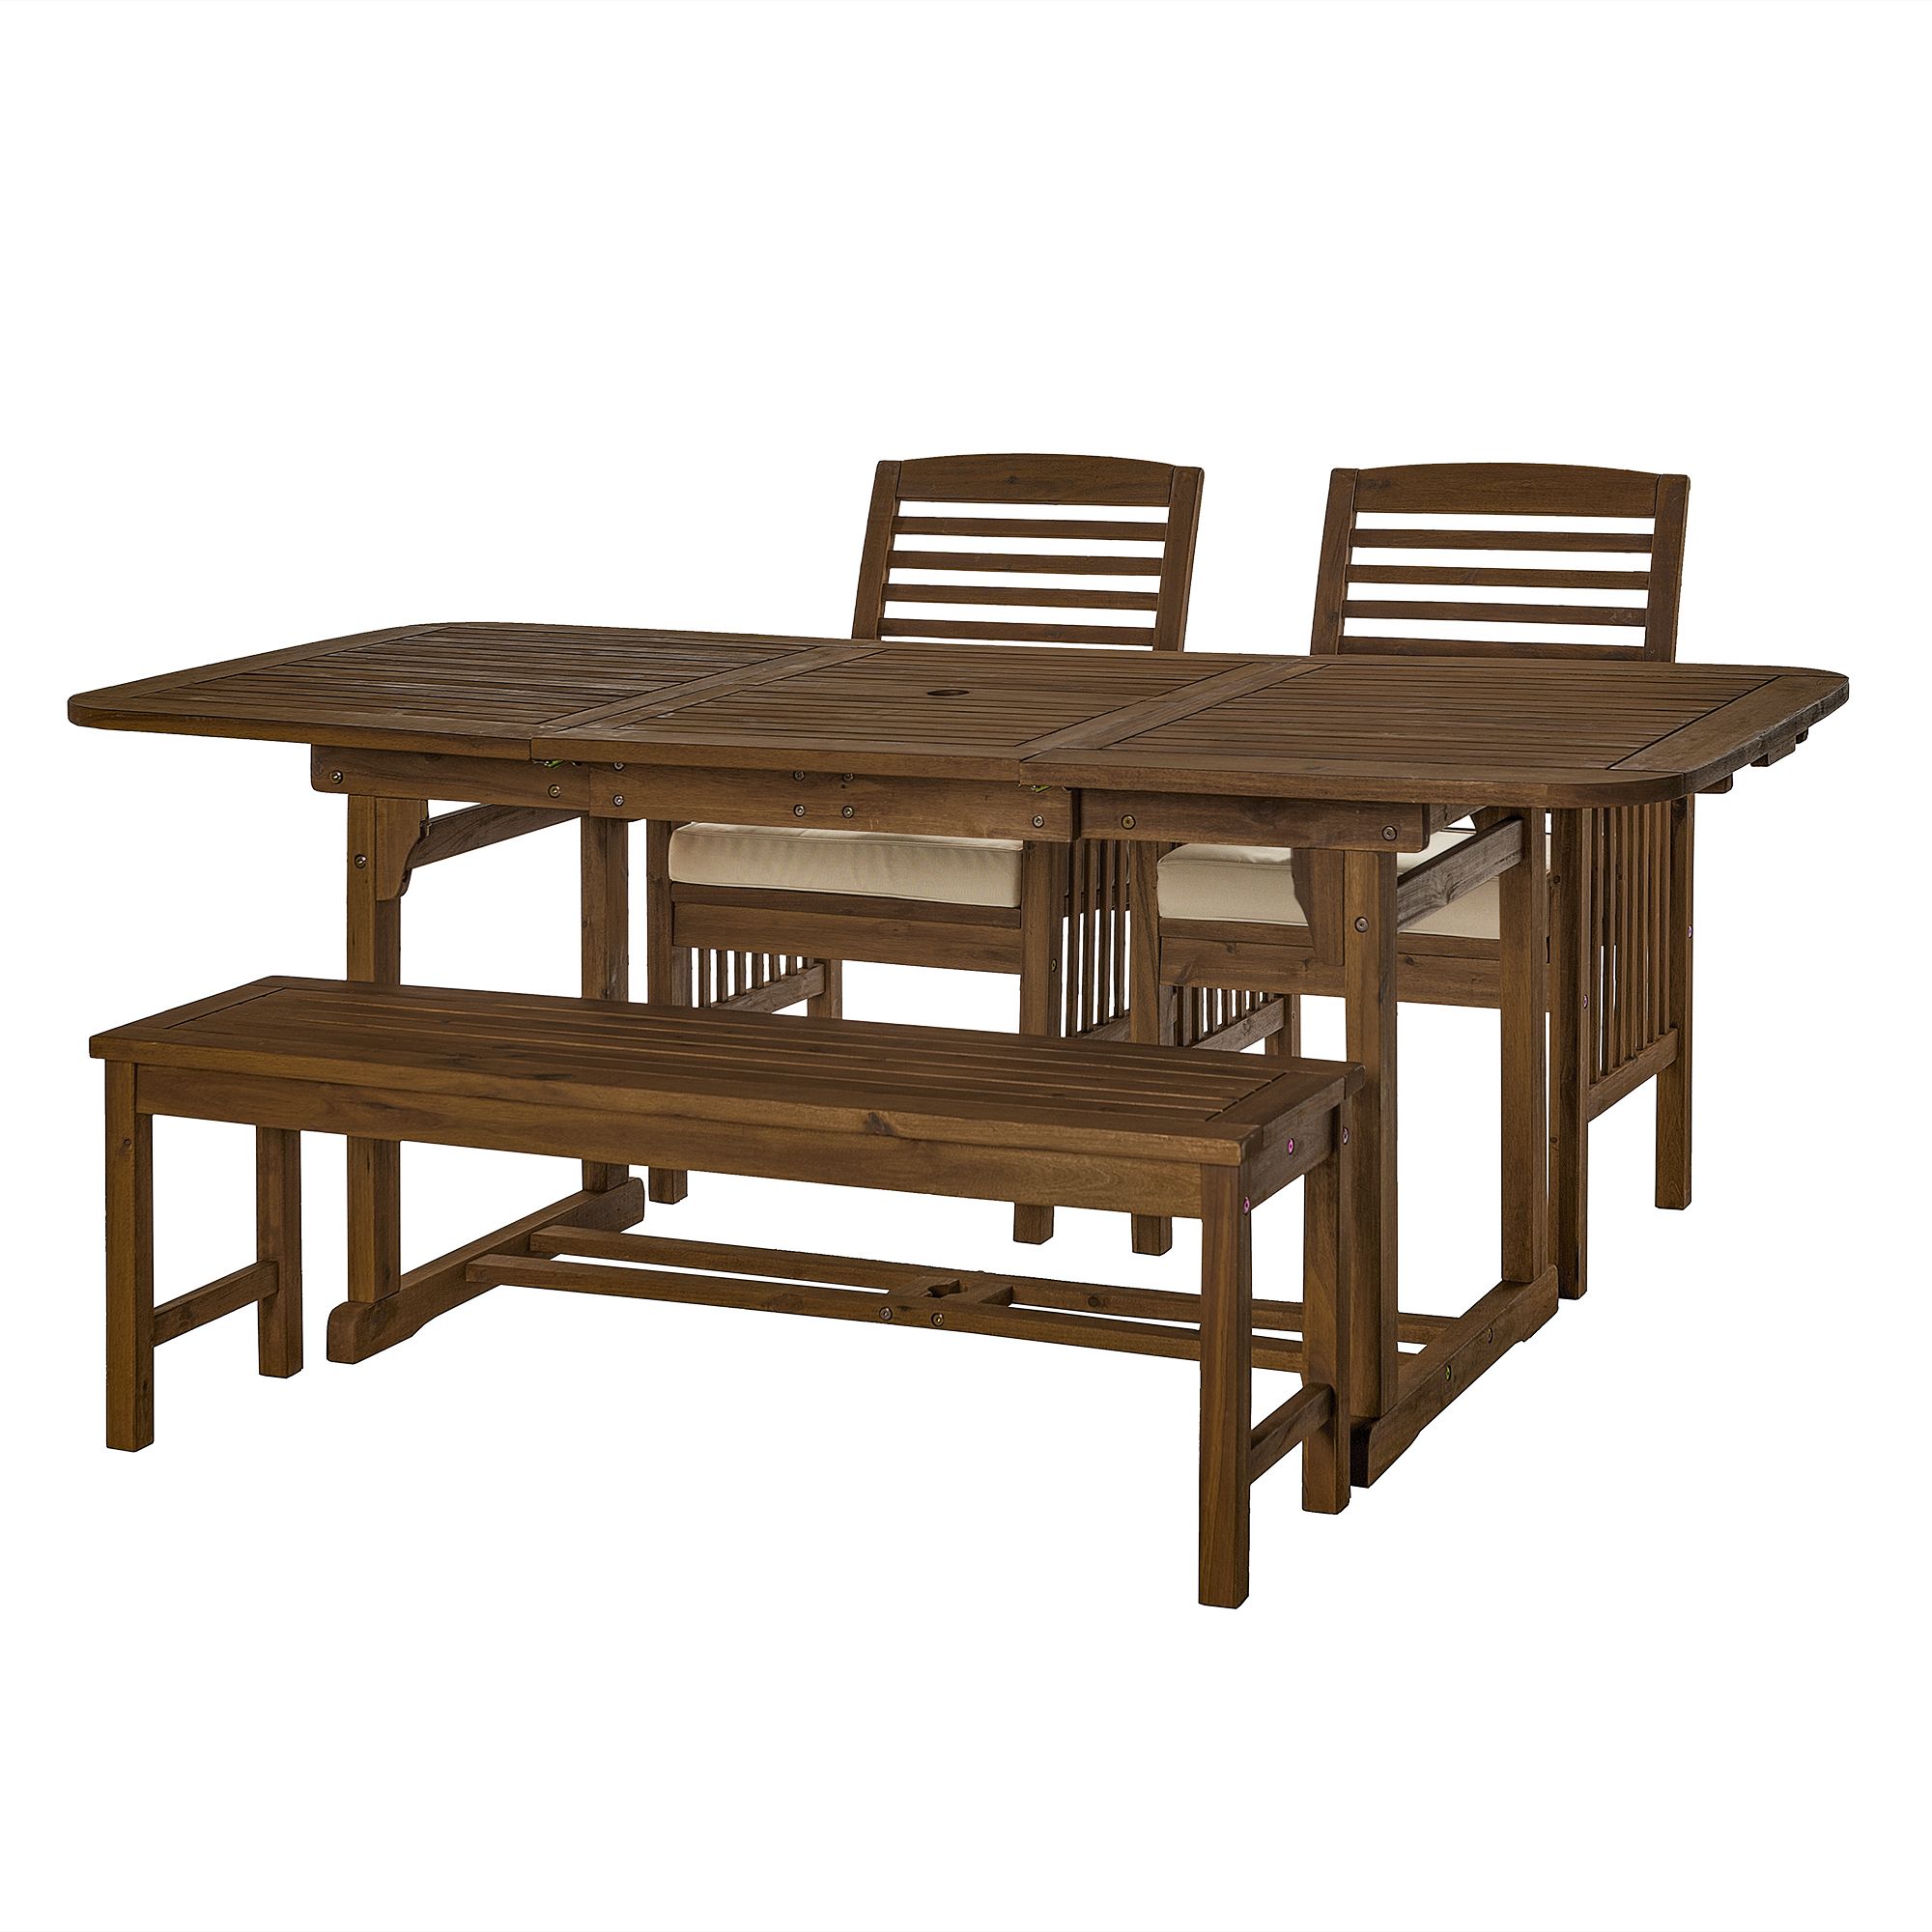 W. Trends 4-pc Outdoor Hunter Acacia Wood Dining Set - Dark Brown